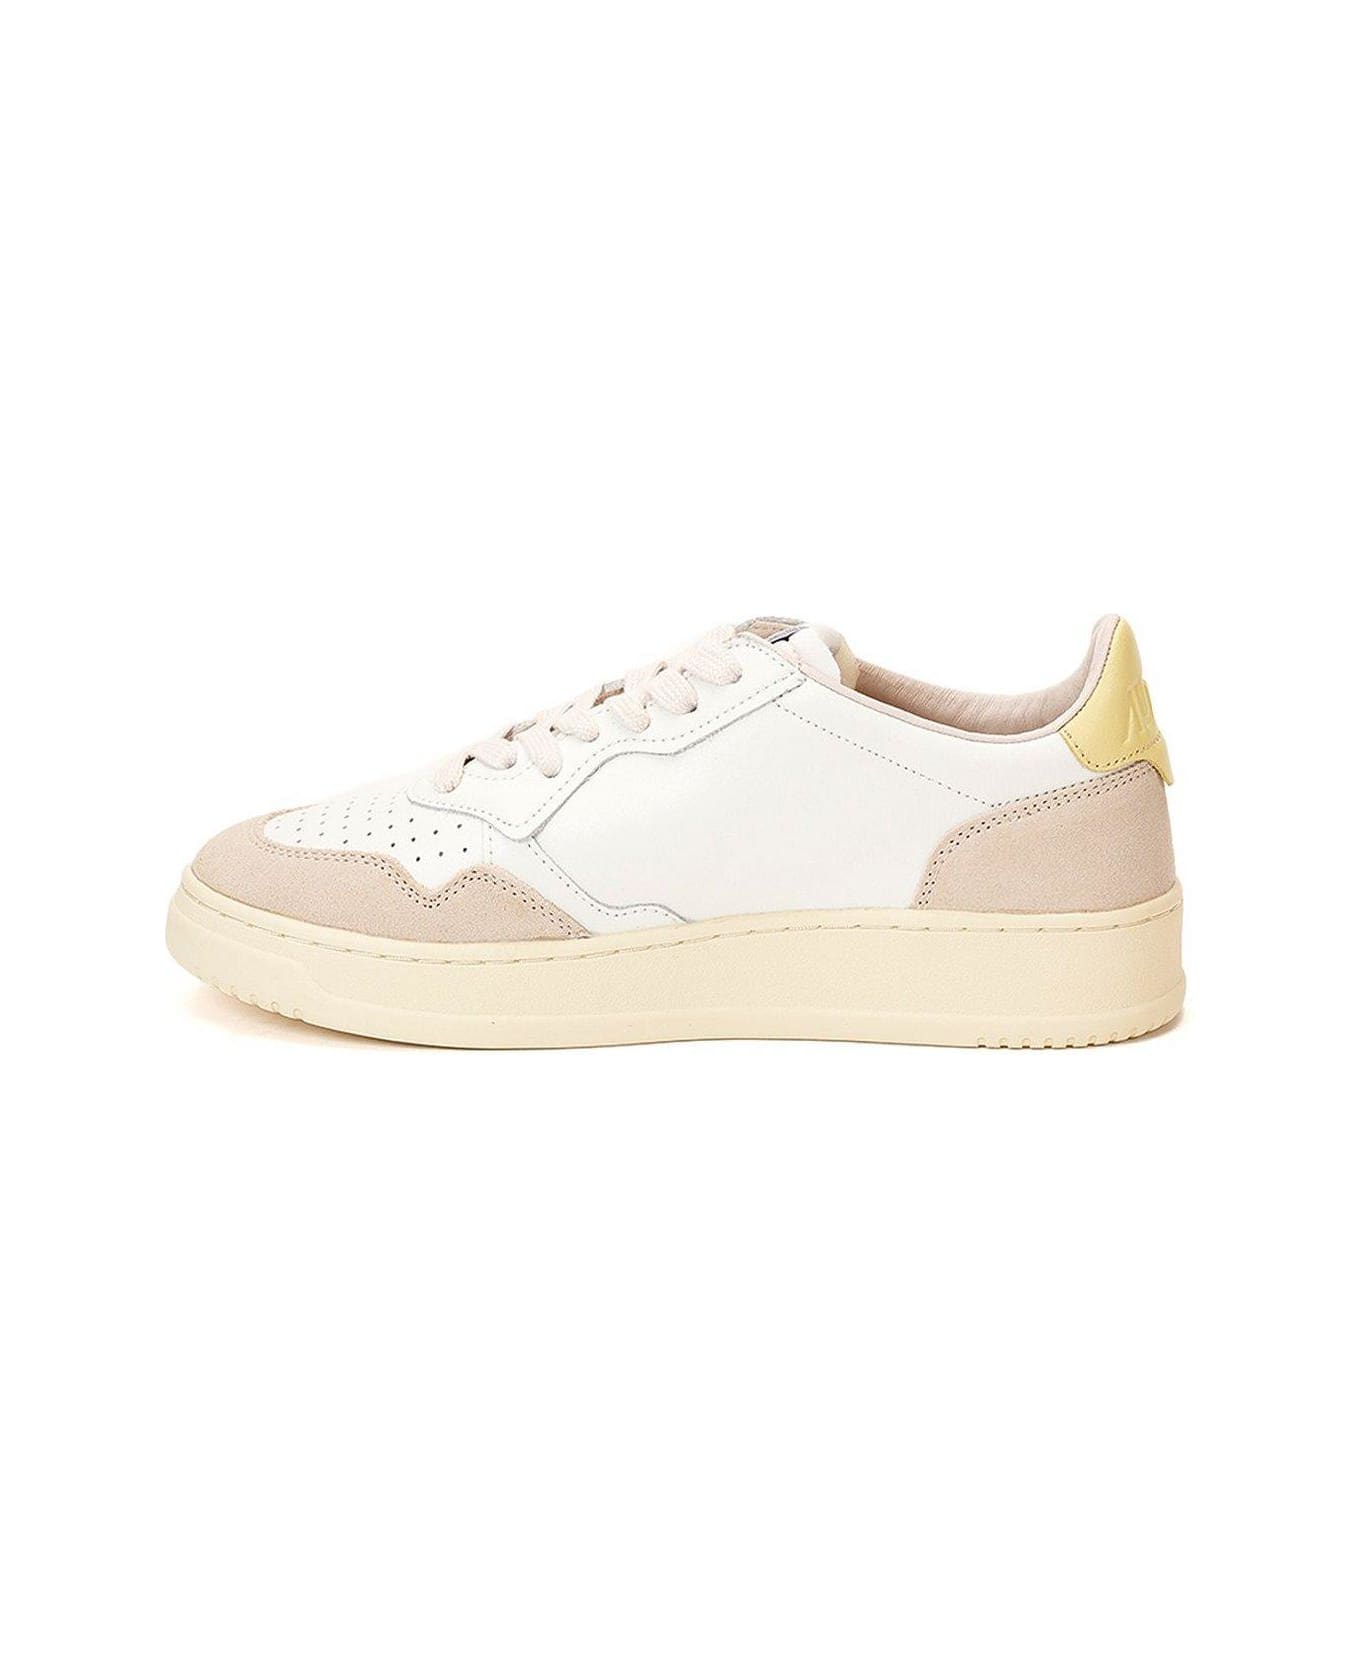 Autry Medalist Low Sneakers - WHITE/yellow スニーカー